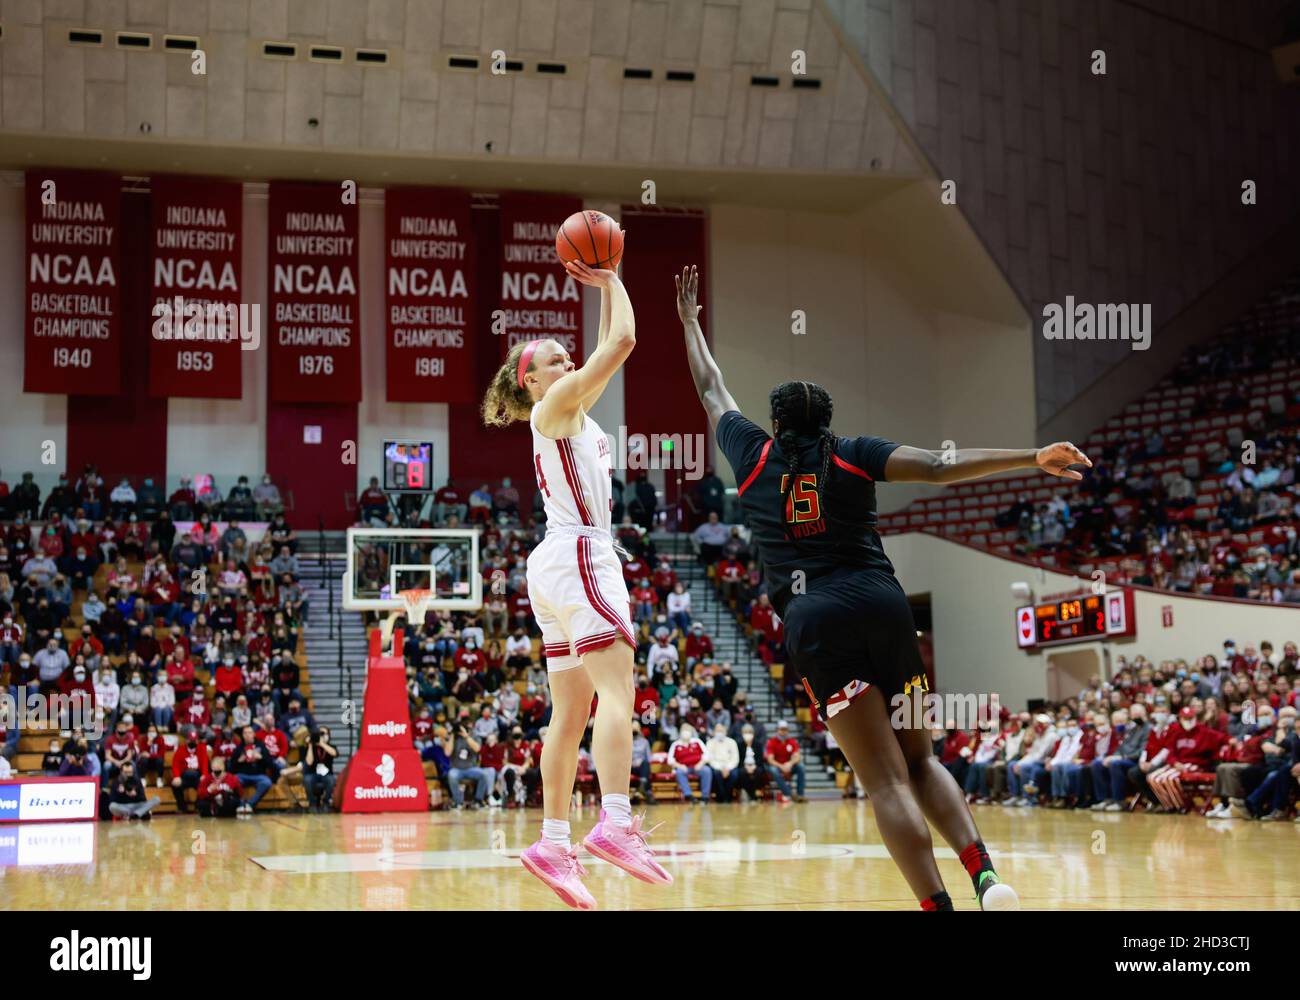 Bloomington, United States. 02nd Jan, 2022. Indiana Hoosiers guard Grace Berger (L) shoots against Maryland Terrapins guard Ashley Owusu (R) during the National Collegiate Athletic Association (NCAA) women's basketball game in Bloomington. Indiana University beat Maryland 70-63. Credit: SOPA Images Limited/Alamy Live News Stock Photo